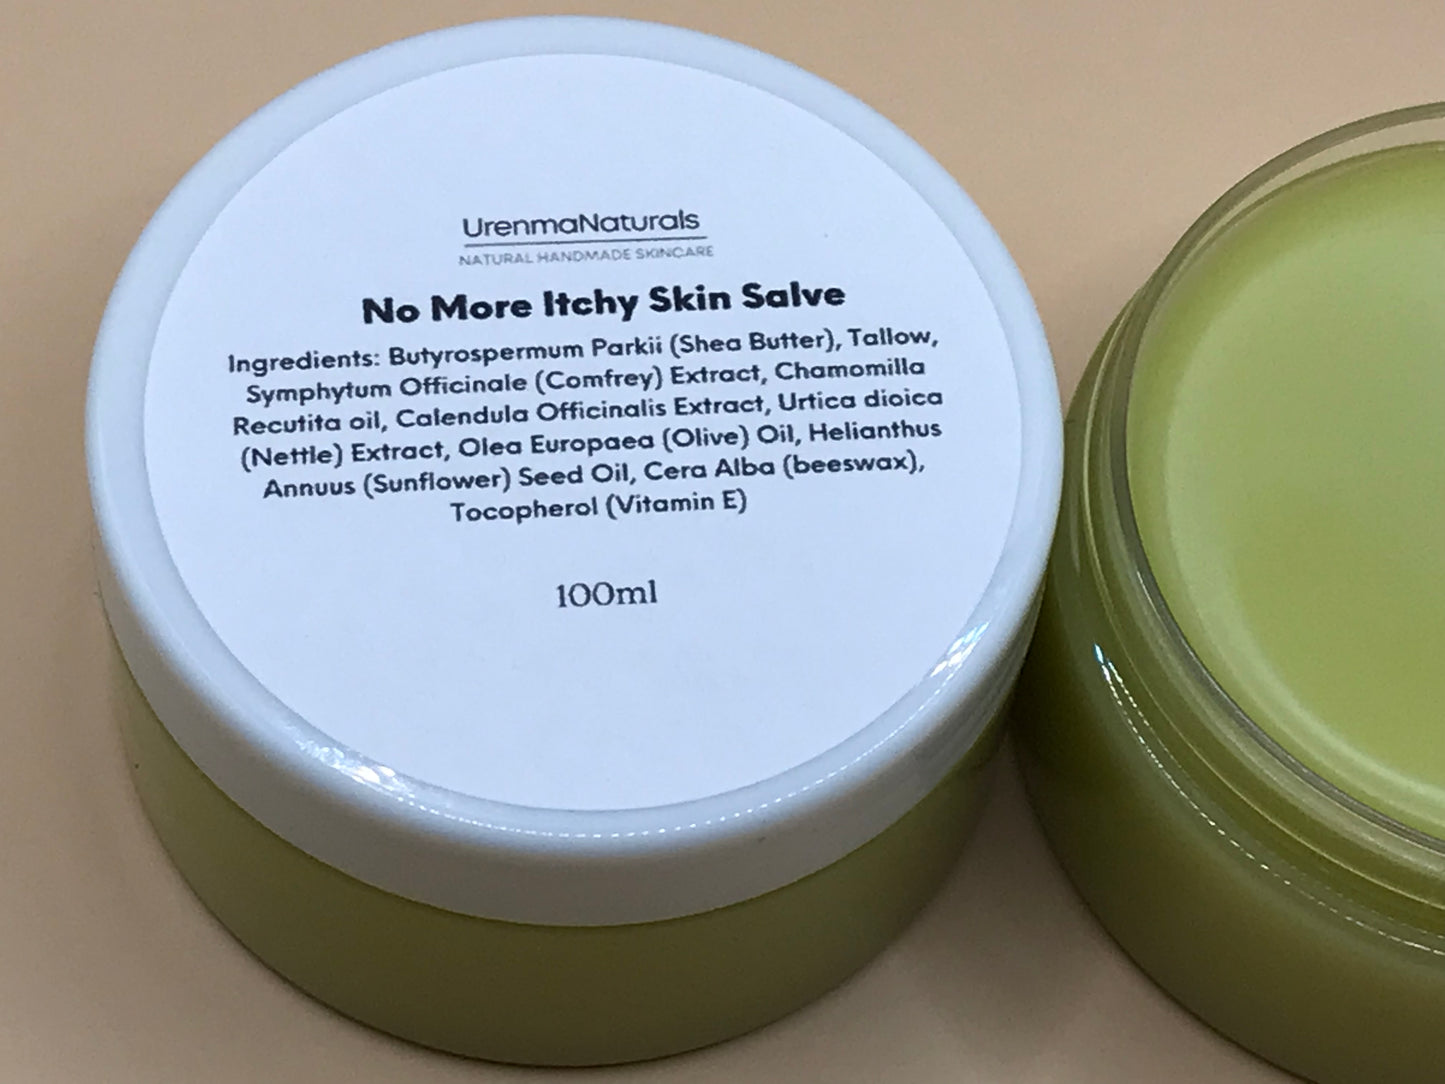 No More Itchy Skin Salve